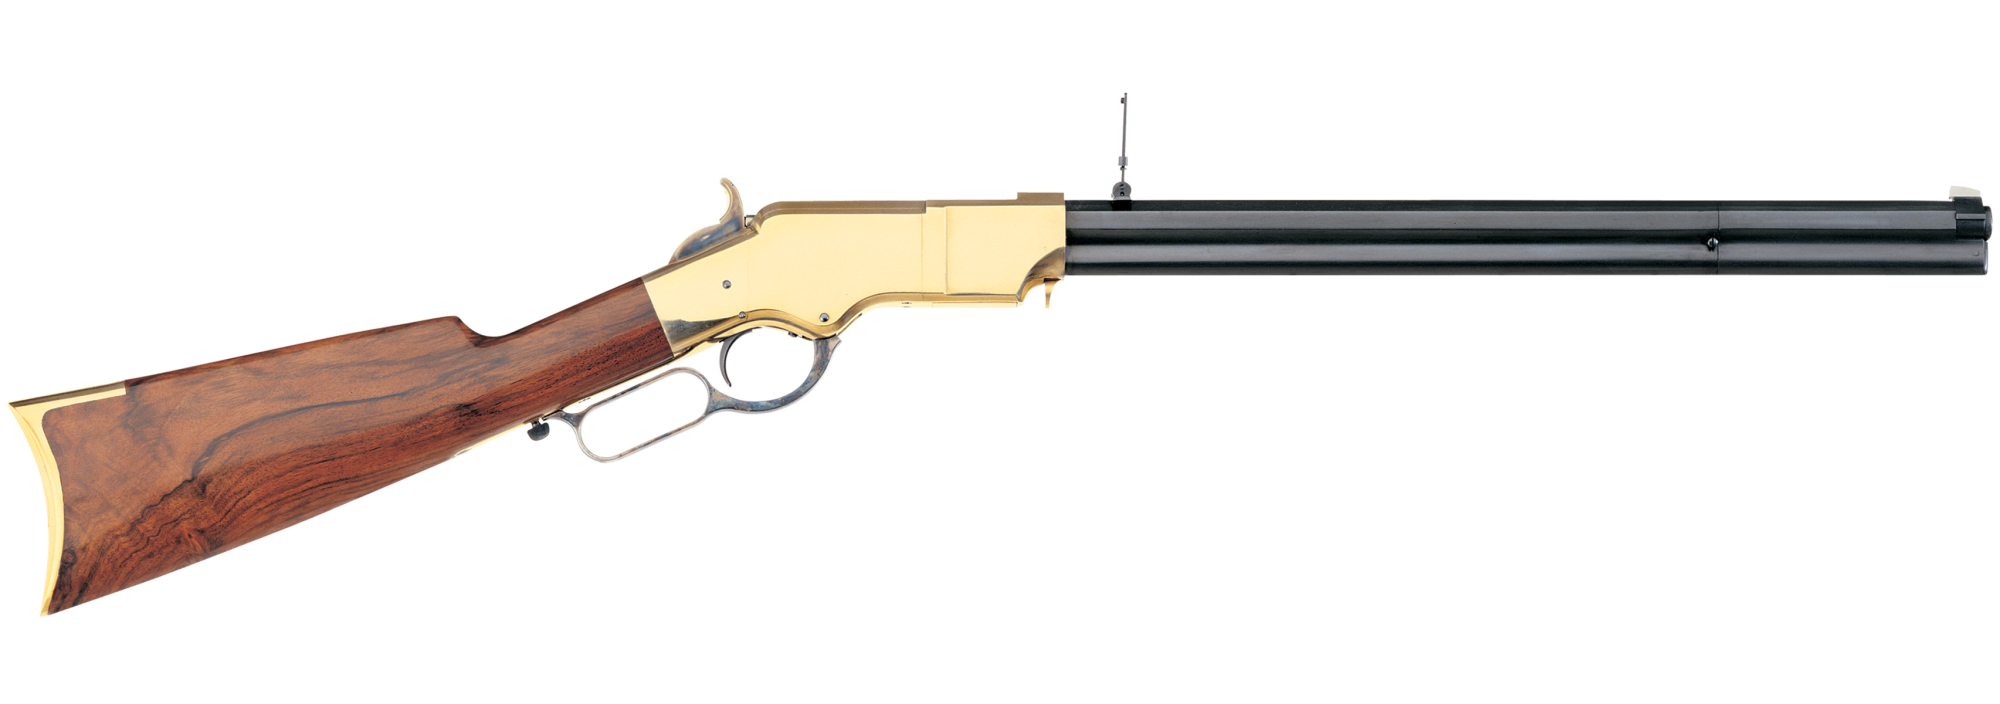 henry rifle model numbers